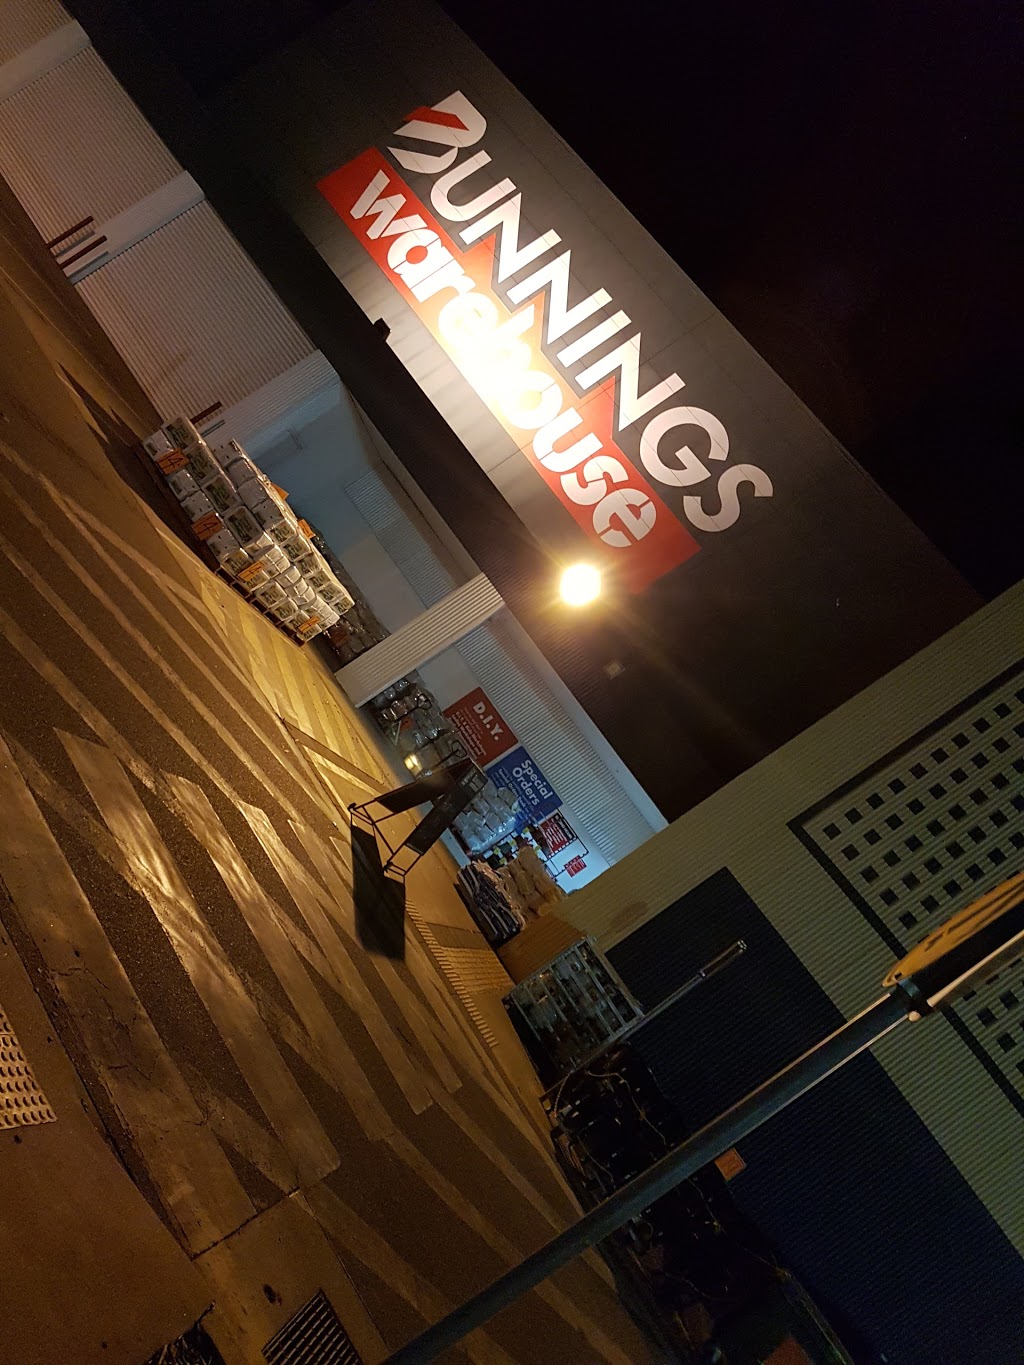 Bunnings Griffith | hardware store | Kidman Way, Griffith NSW 2680, Australia | 0269669700 OR +61 2 6966 9700